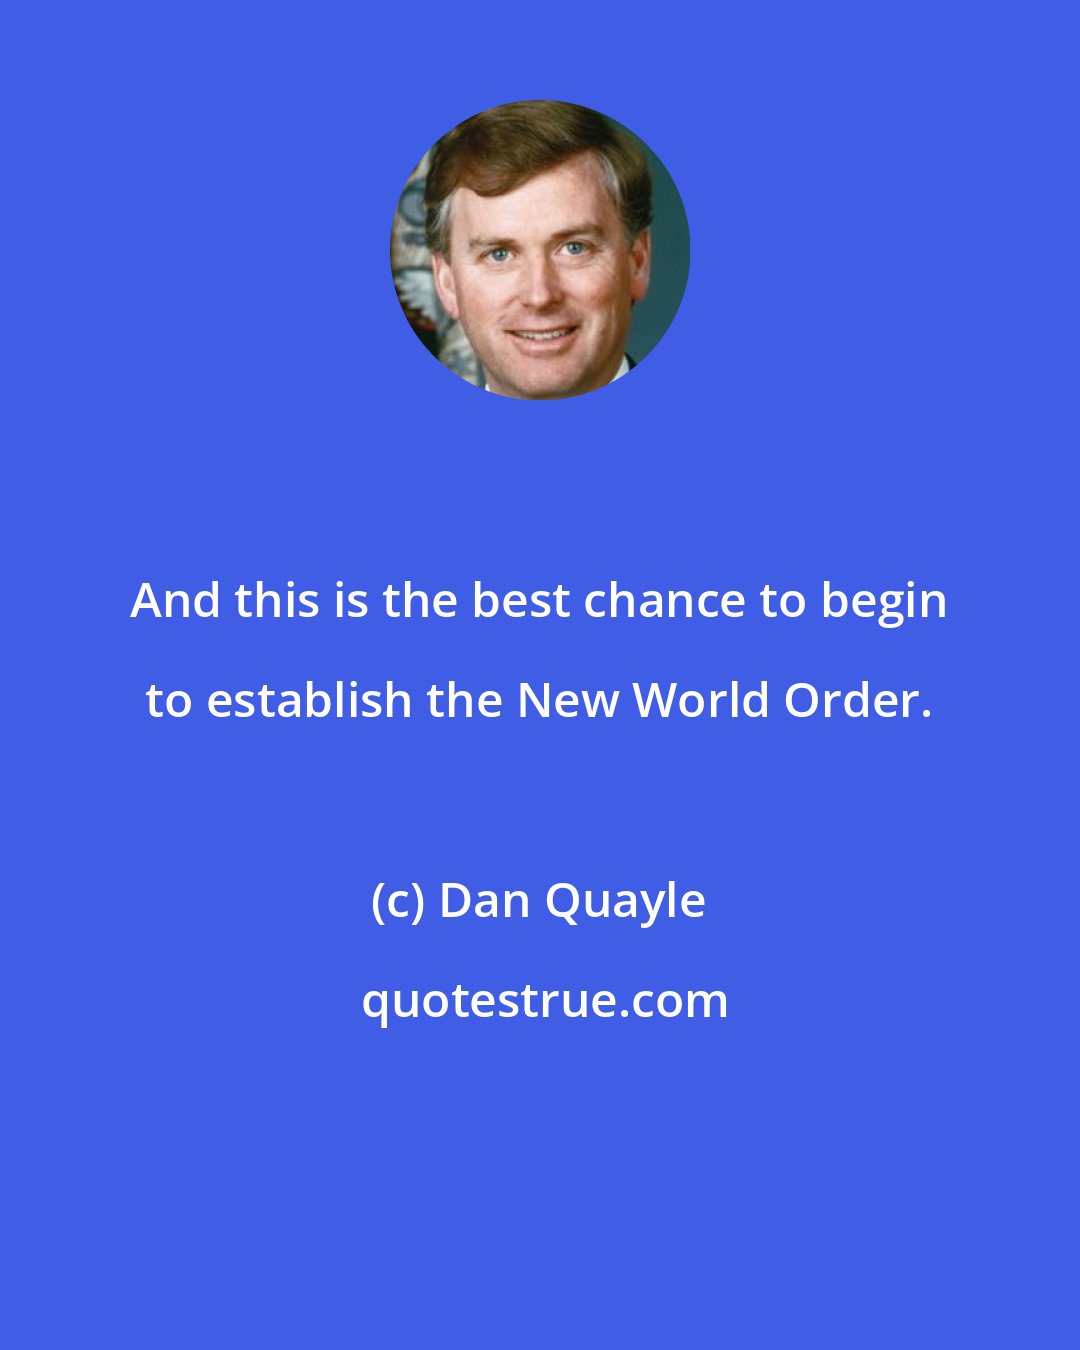 Dan Quayle: And this is the best chance to begin to establish the New World Order.